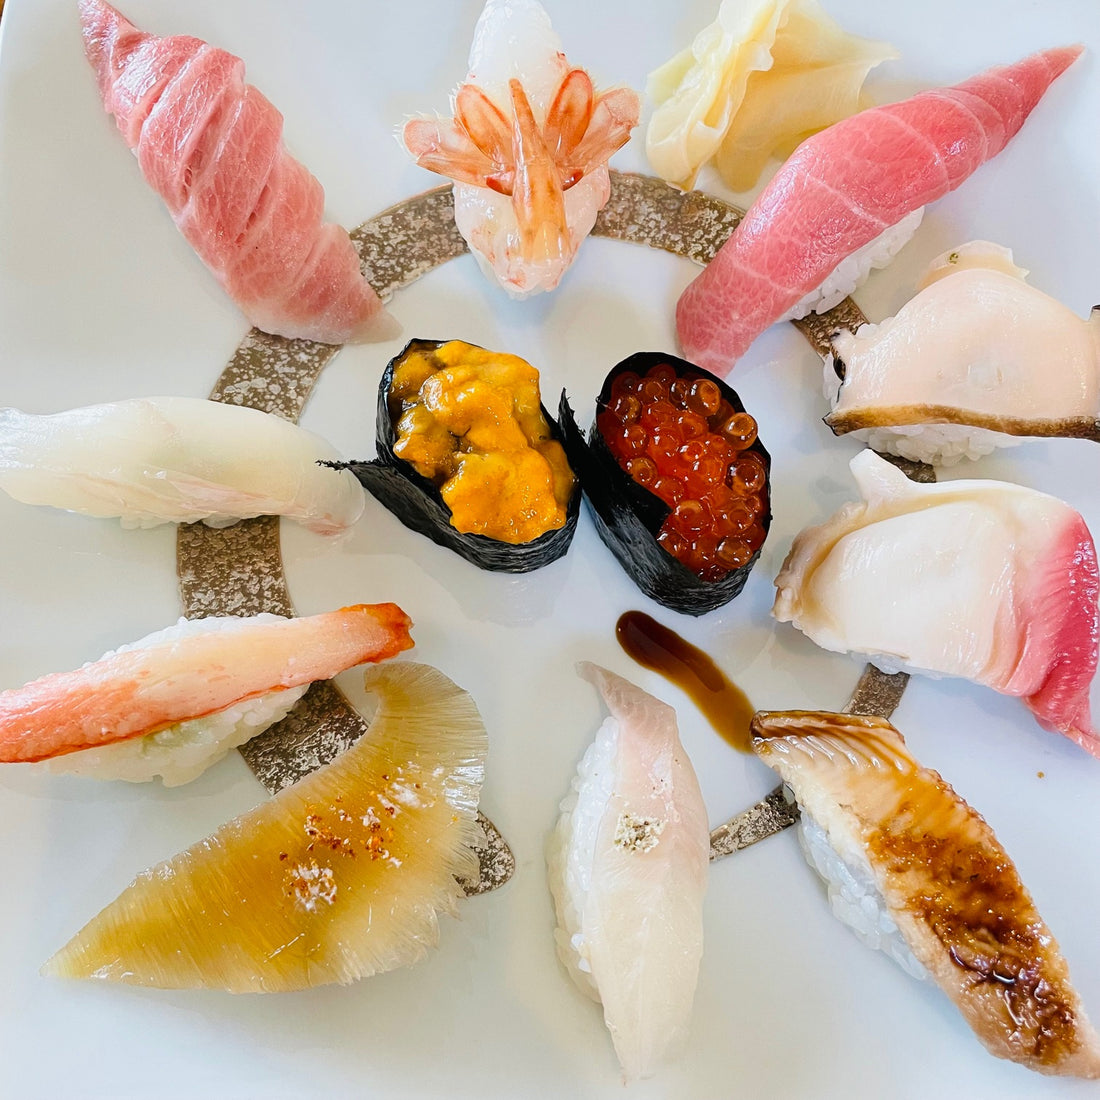 Have you ever had the best sushi and sashimi?